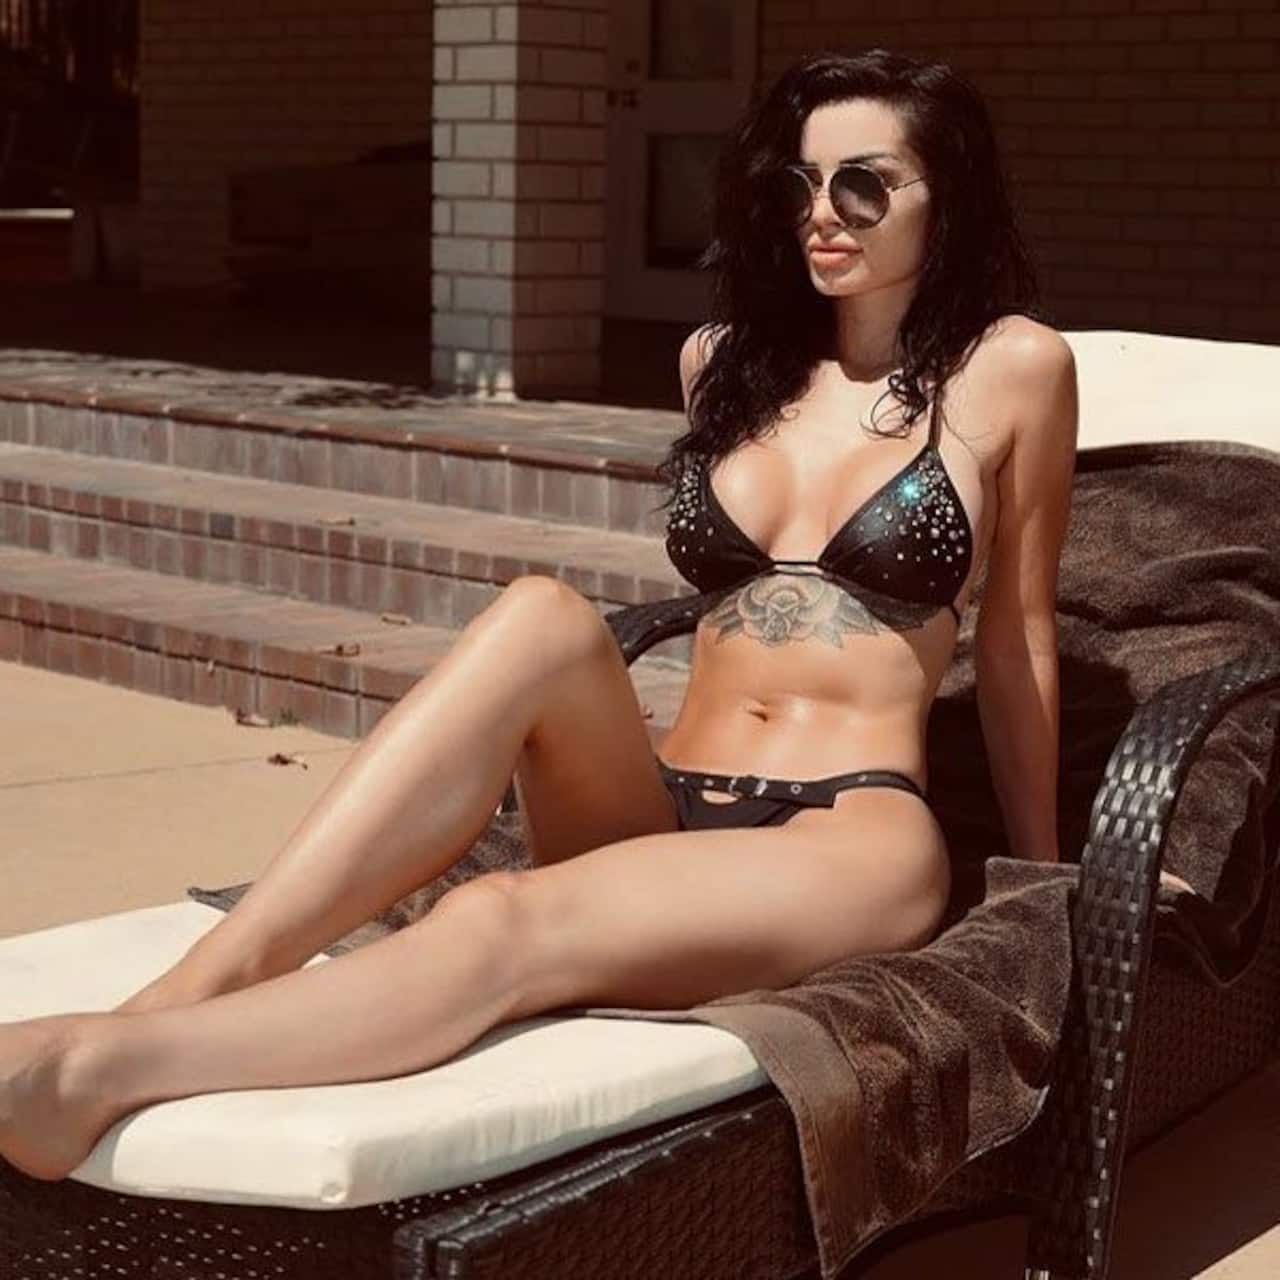 Wwe Wrestler Paige Turns Into A Seductress In These Super Hot Throwback Pics